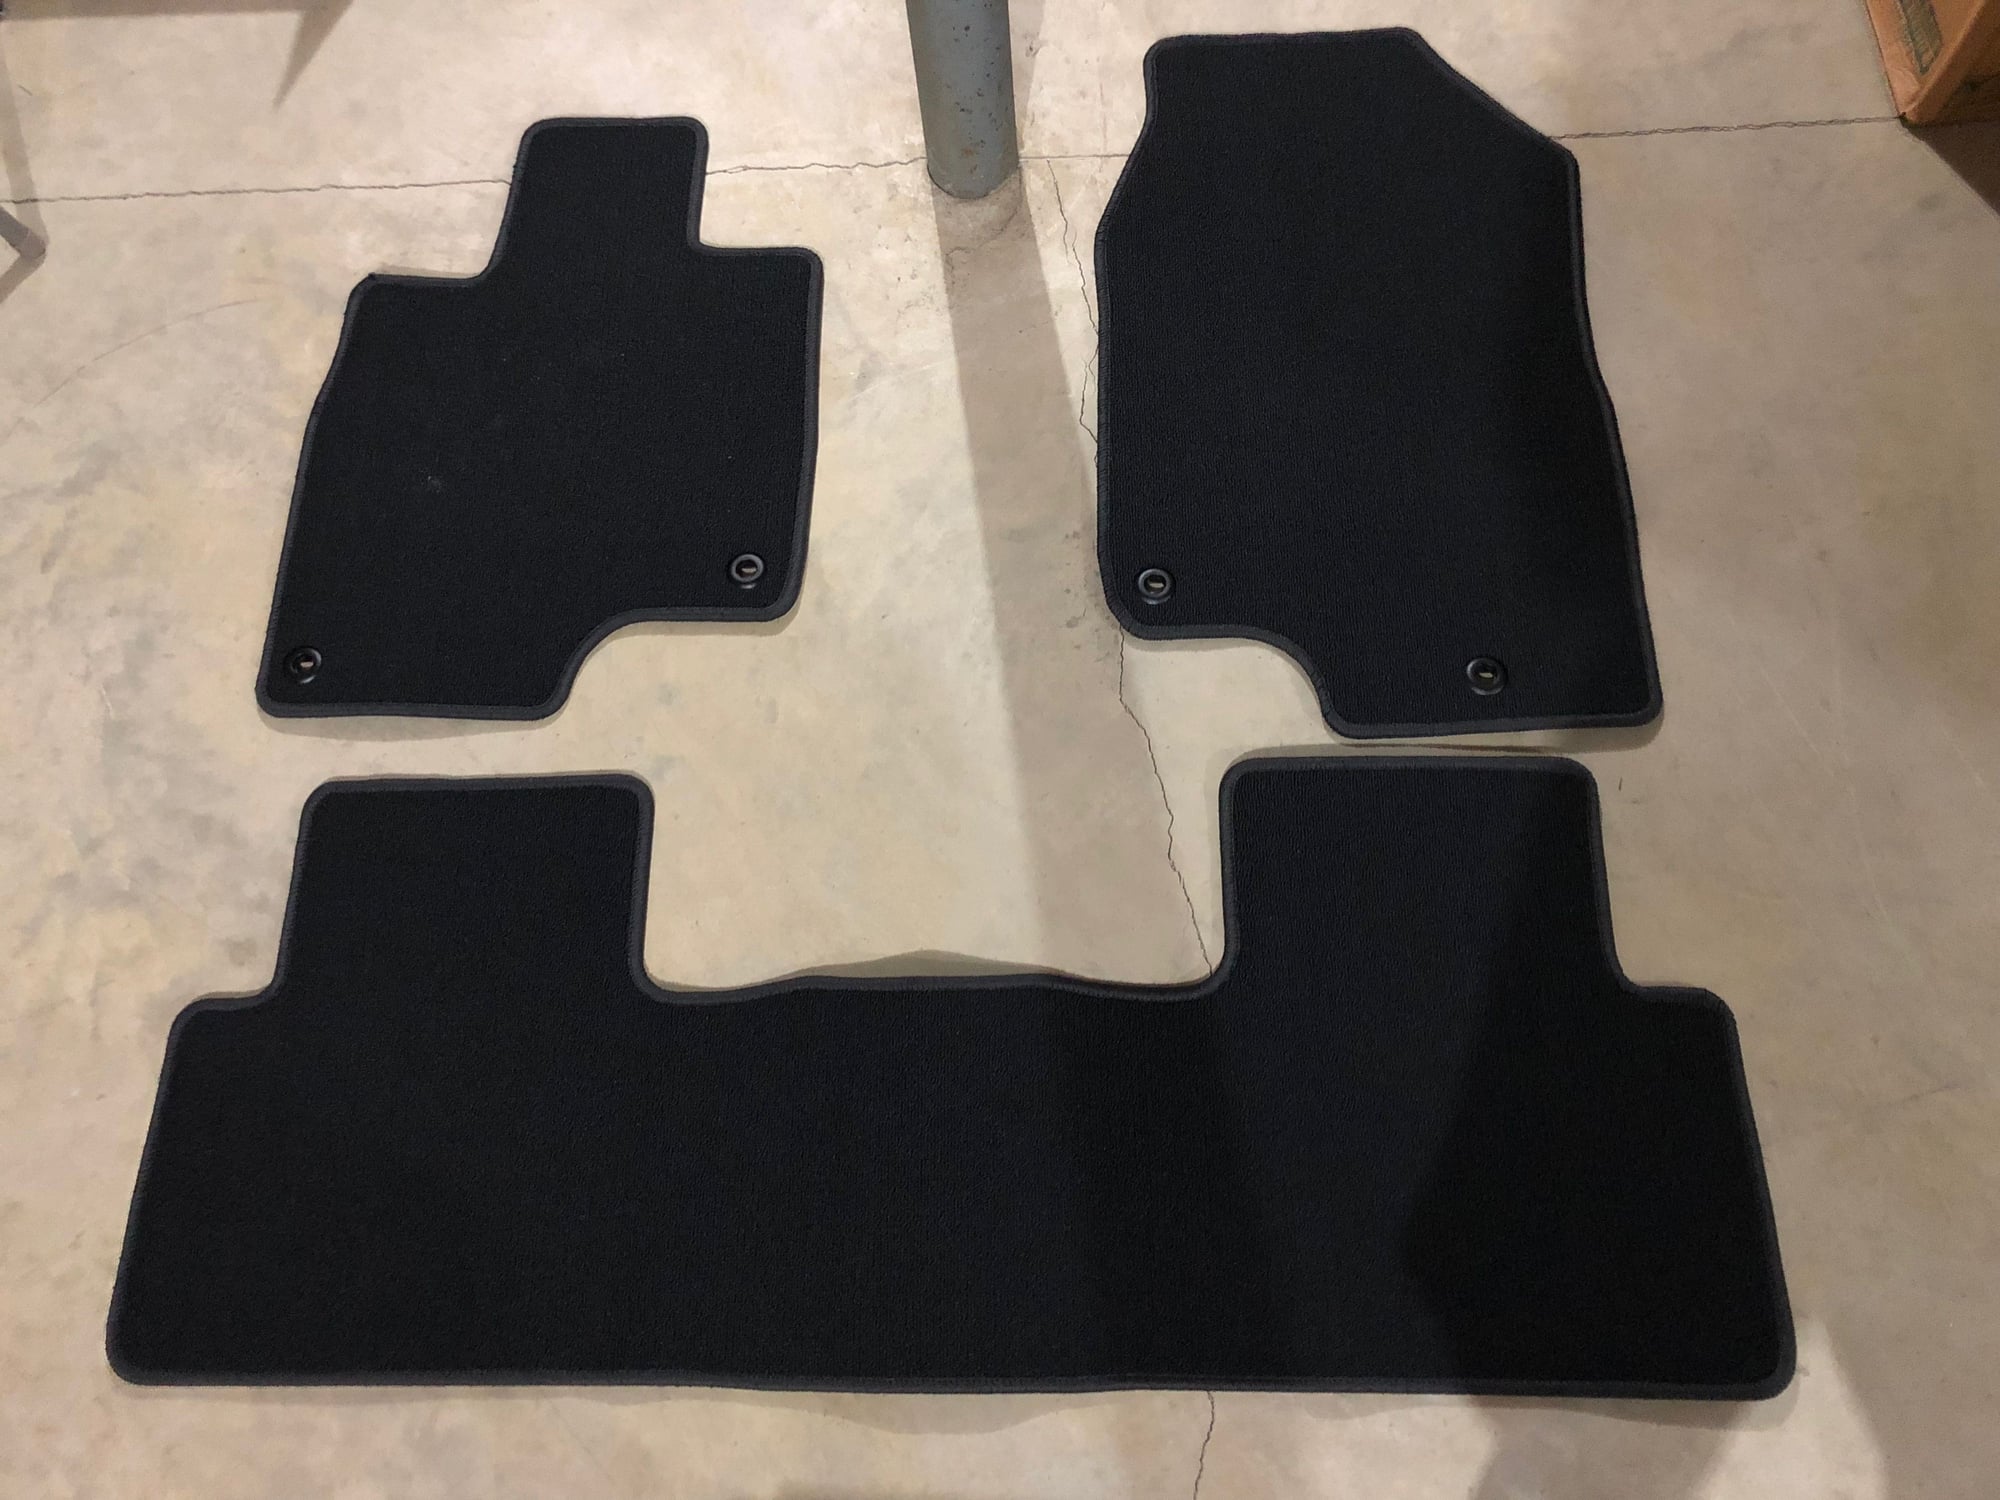 Miscellaneous - EXPIRED FS: 2019 RDX OEM Cross Bars, OEM Floor Mats, stock Rear Panel Protector - New - 2019 Acura RDX - Lancaster, PA 17602, United States